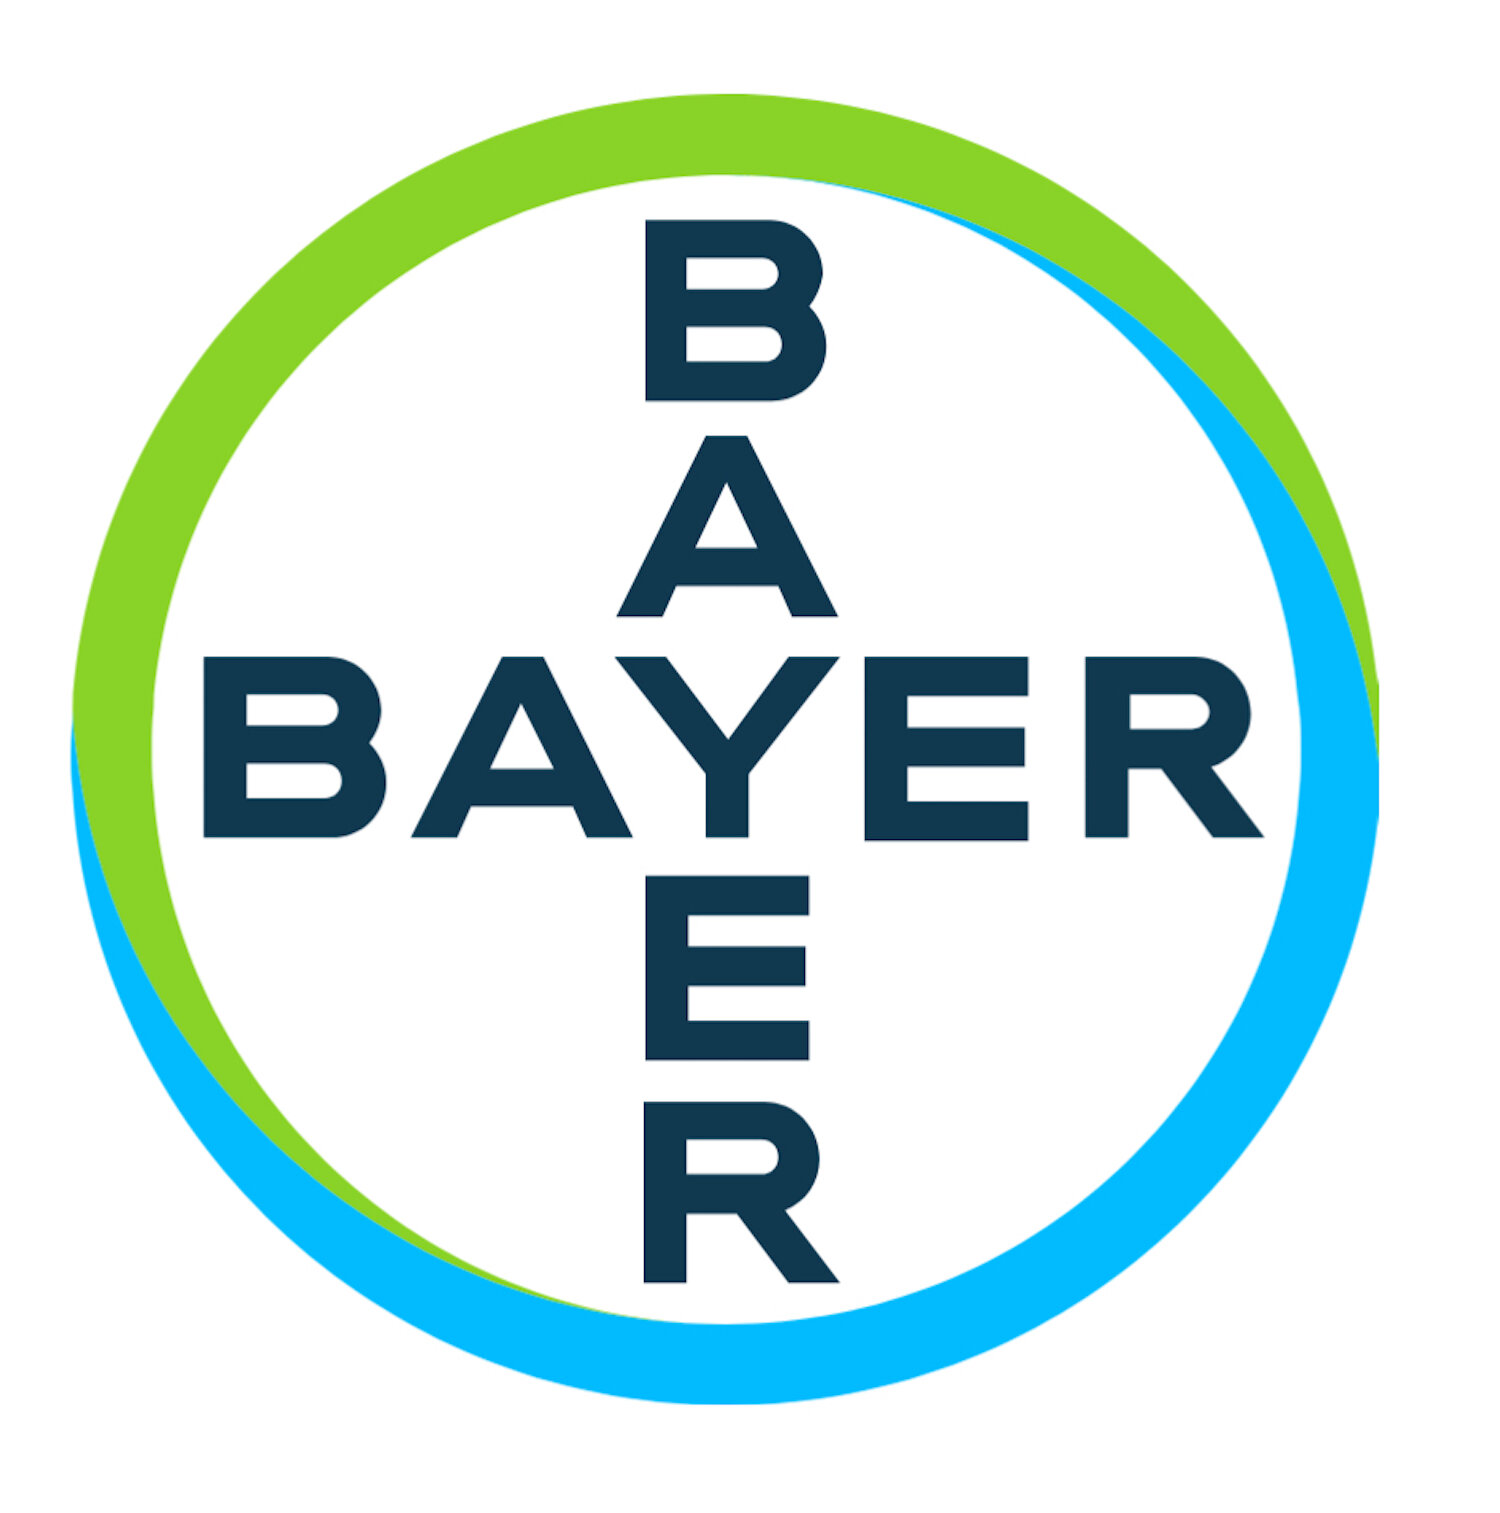 Report To Bayer